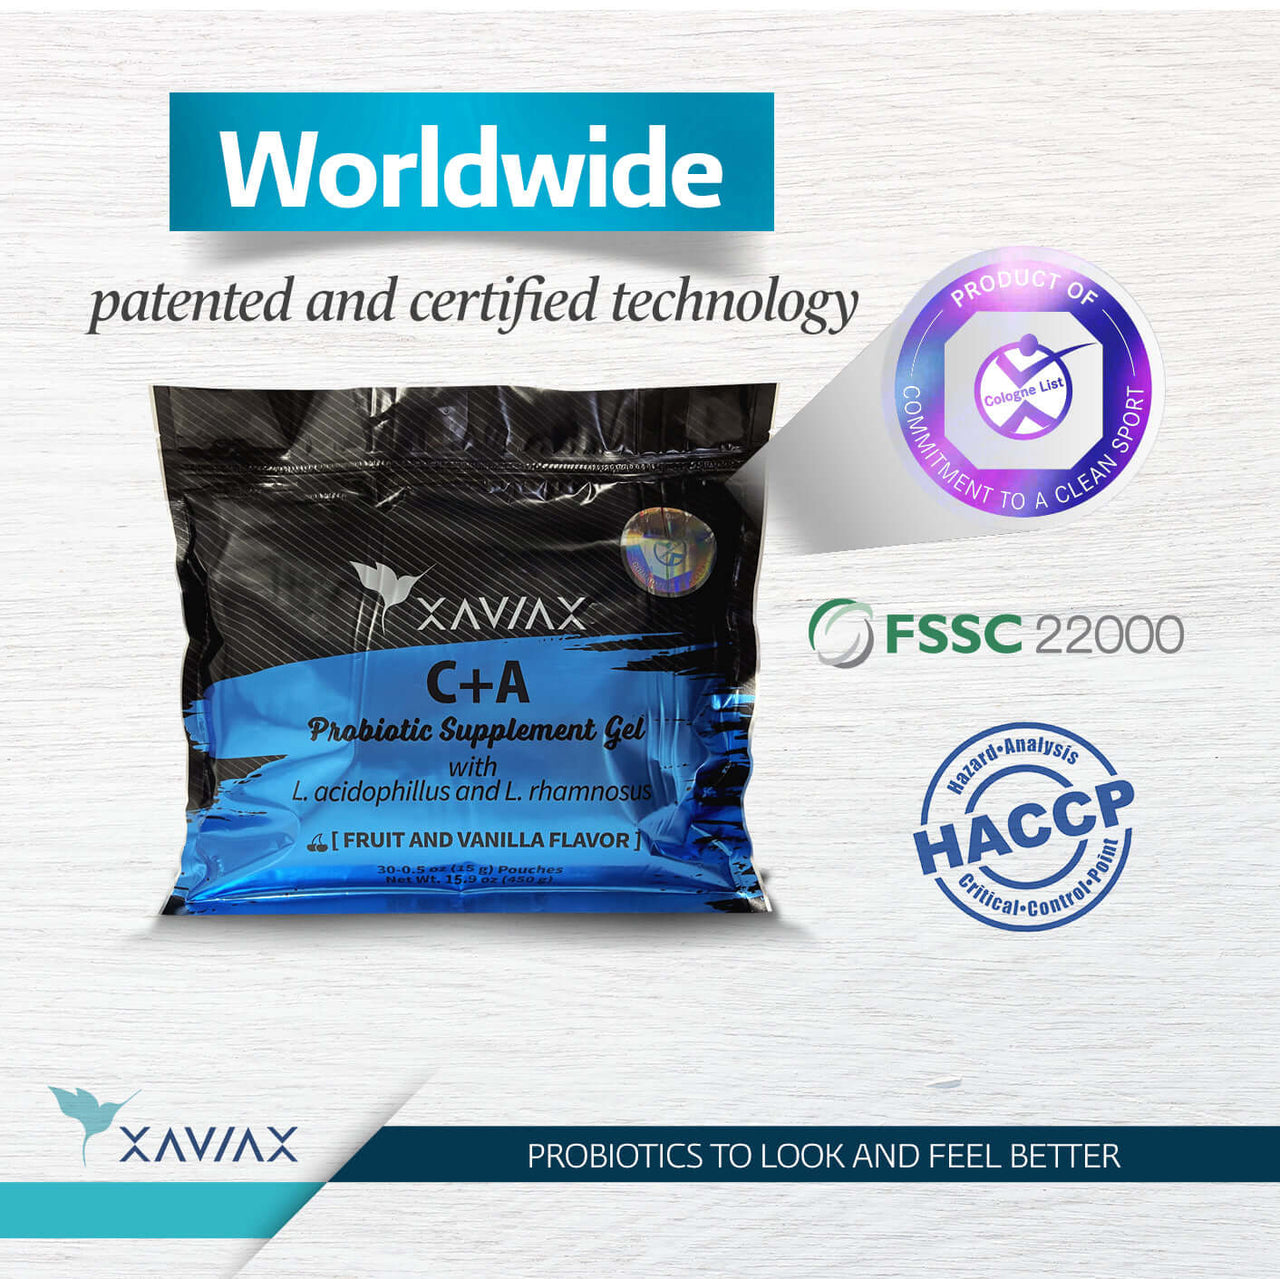 WORLDWIDE PATENTED AND CERTIFIED TECHNOLOGY